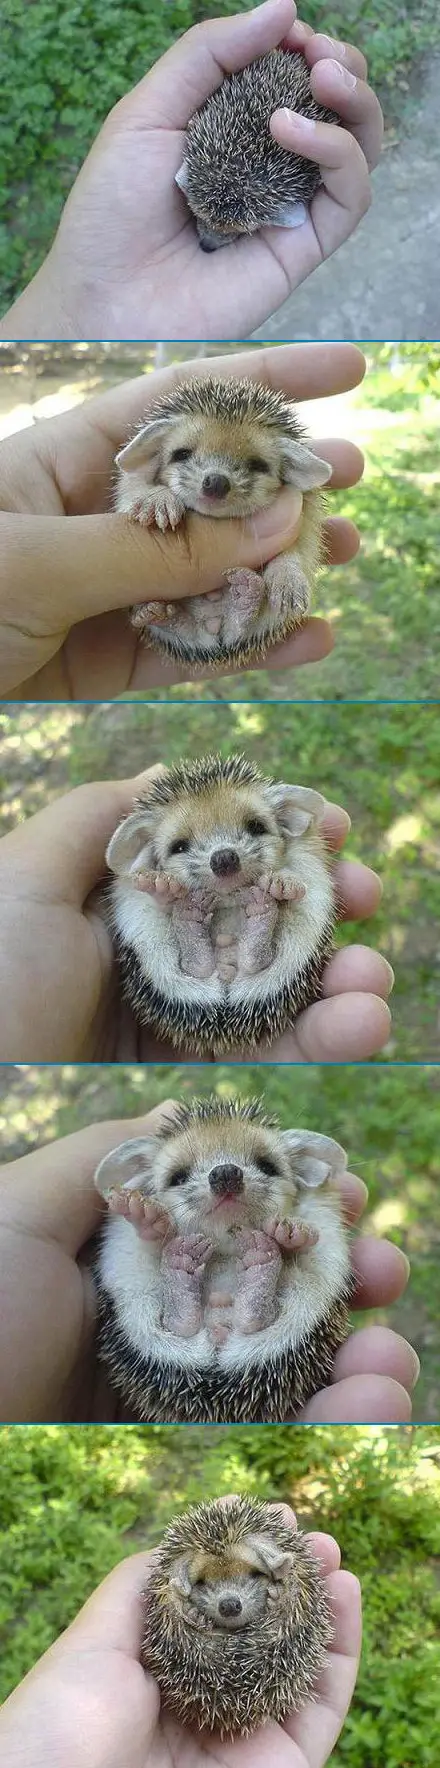 Funny Picture - Baby Hedgehog